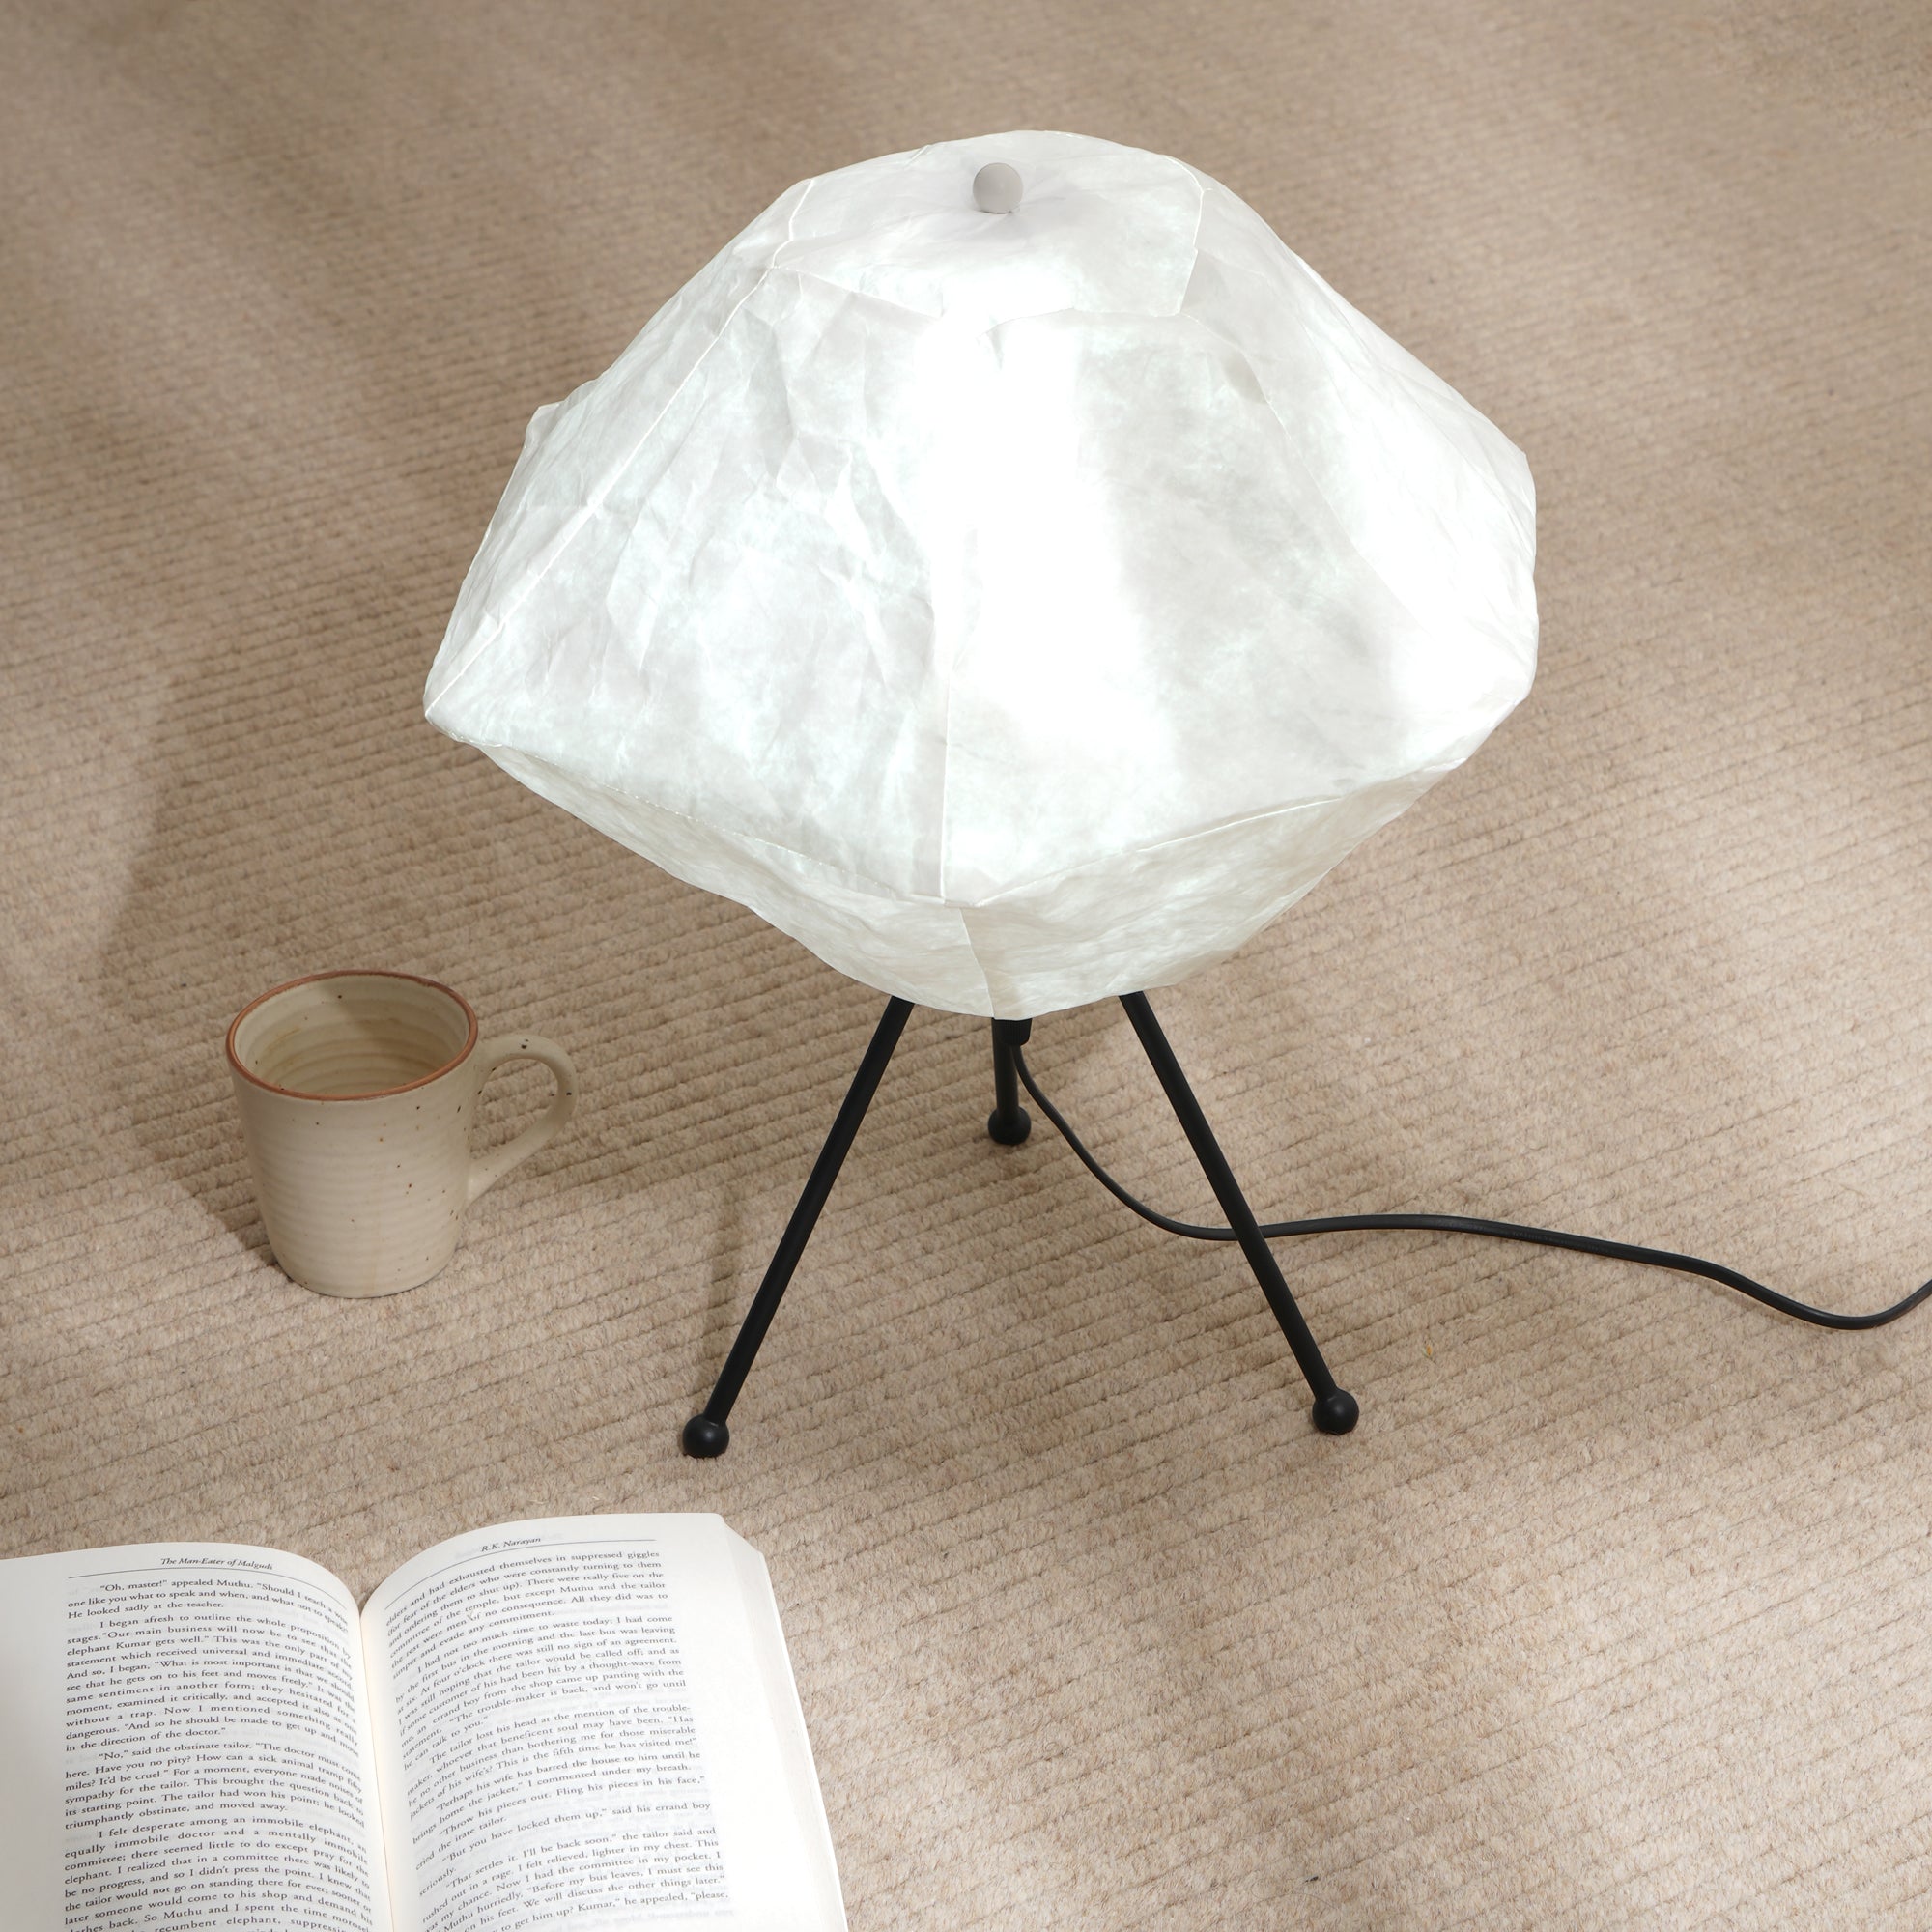 Luna Table Lamp - Tripod Table Lamp, Innovative Handcrafted Design desk lamp, Recycled Polyethylene and Metal